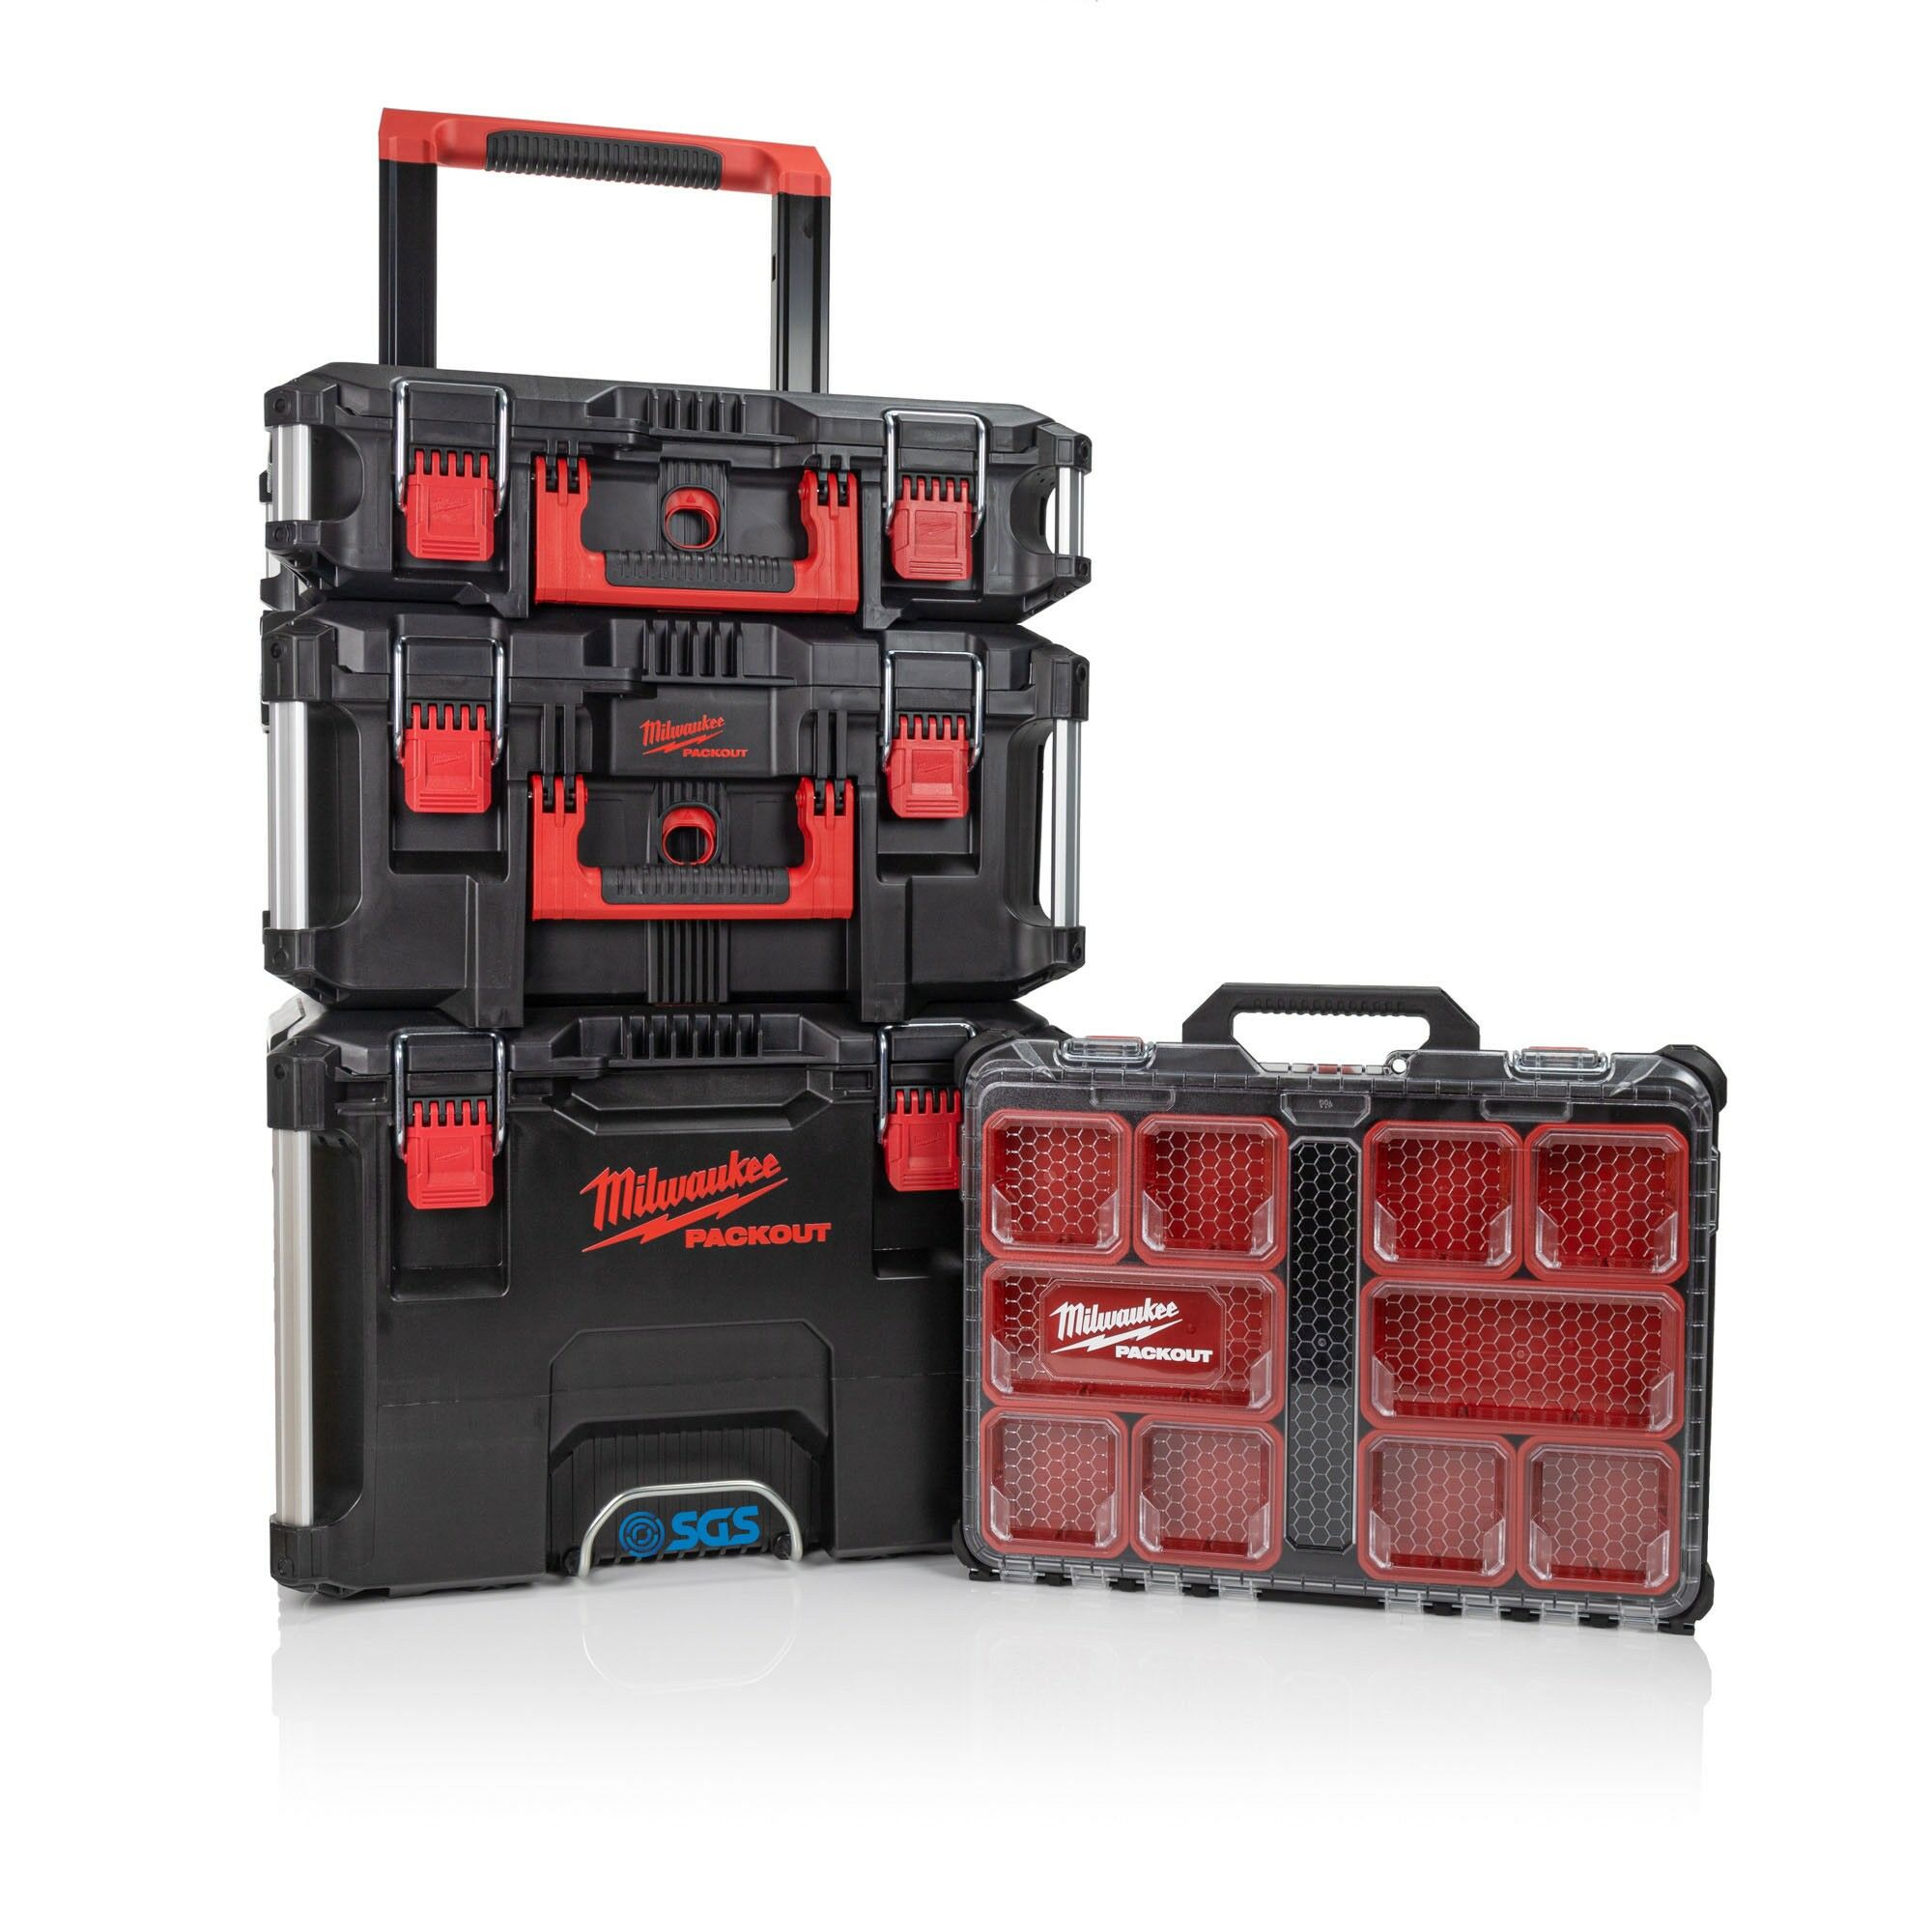 Milwaukee PACKOUT Bundle with 3 Piece Toolbox System and Slim Organiser